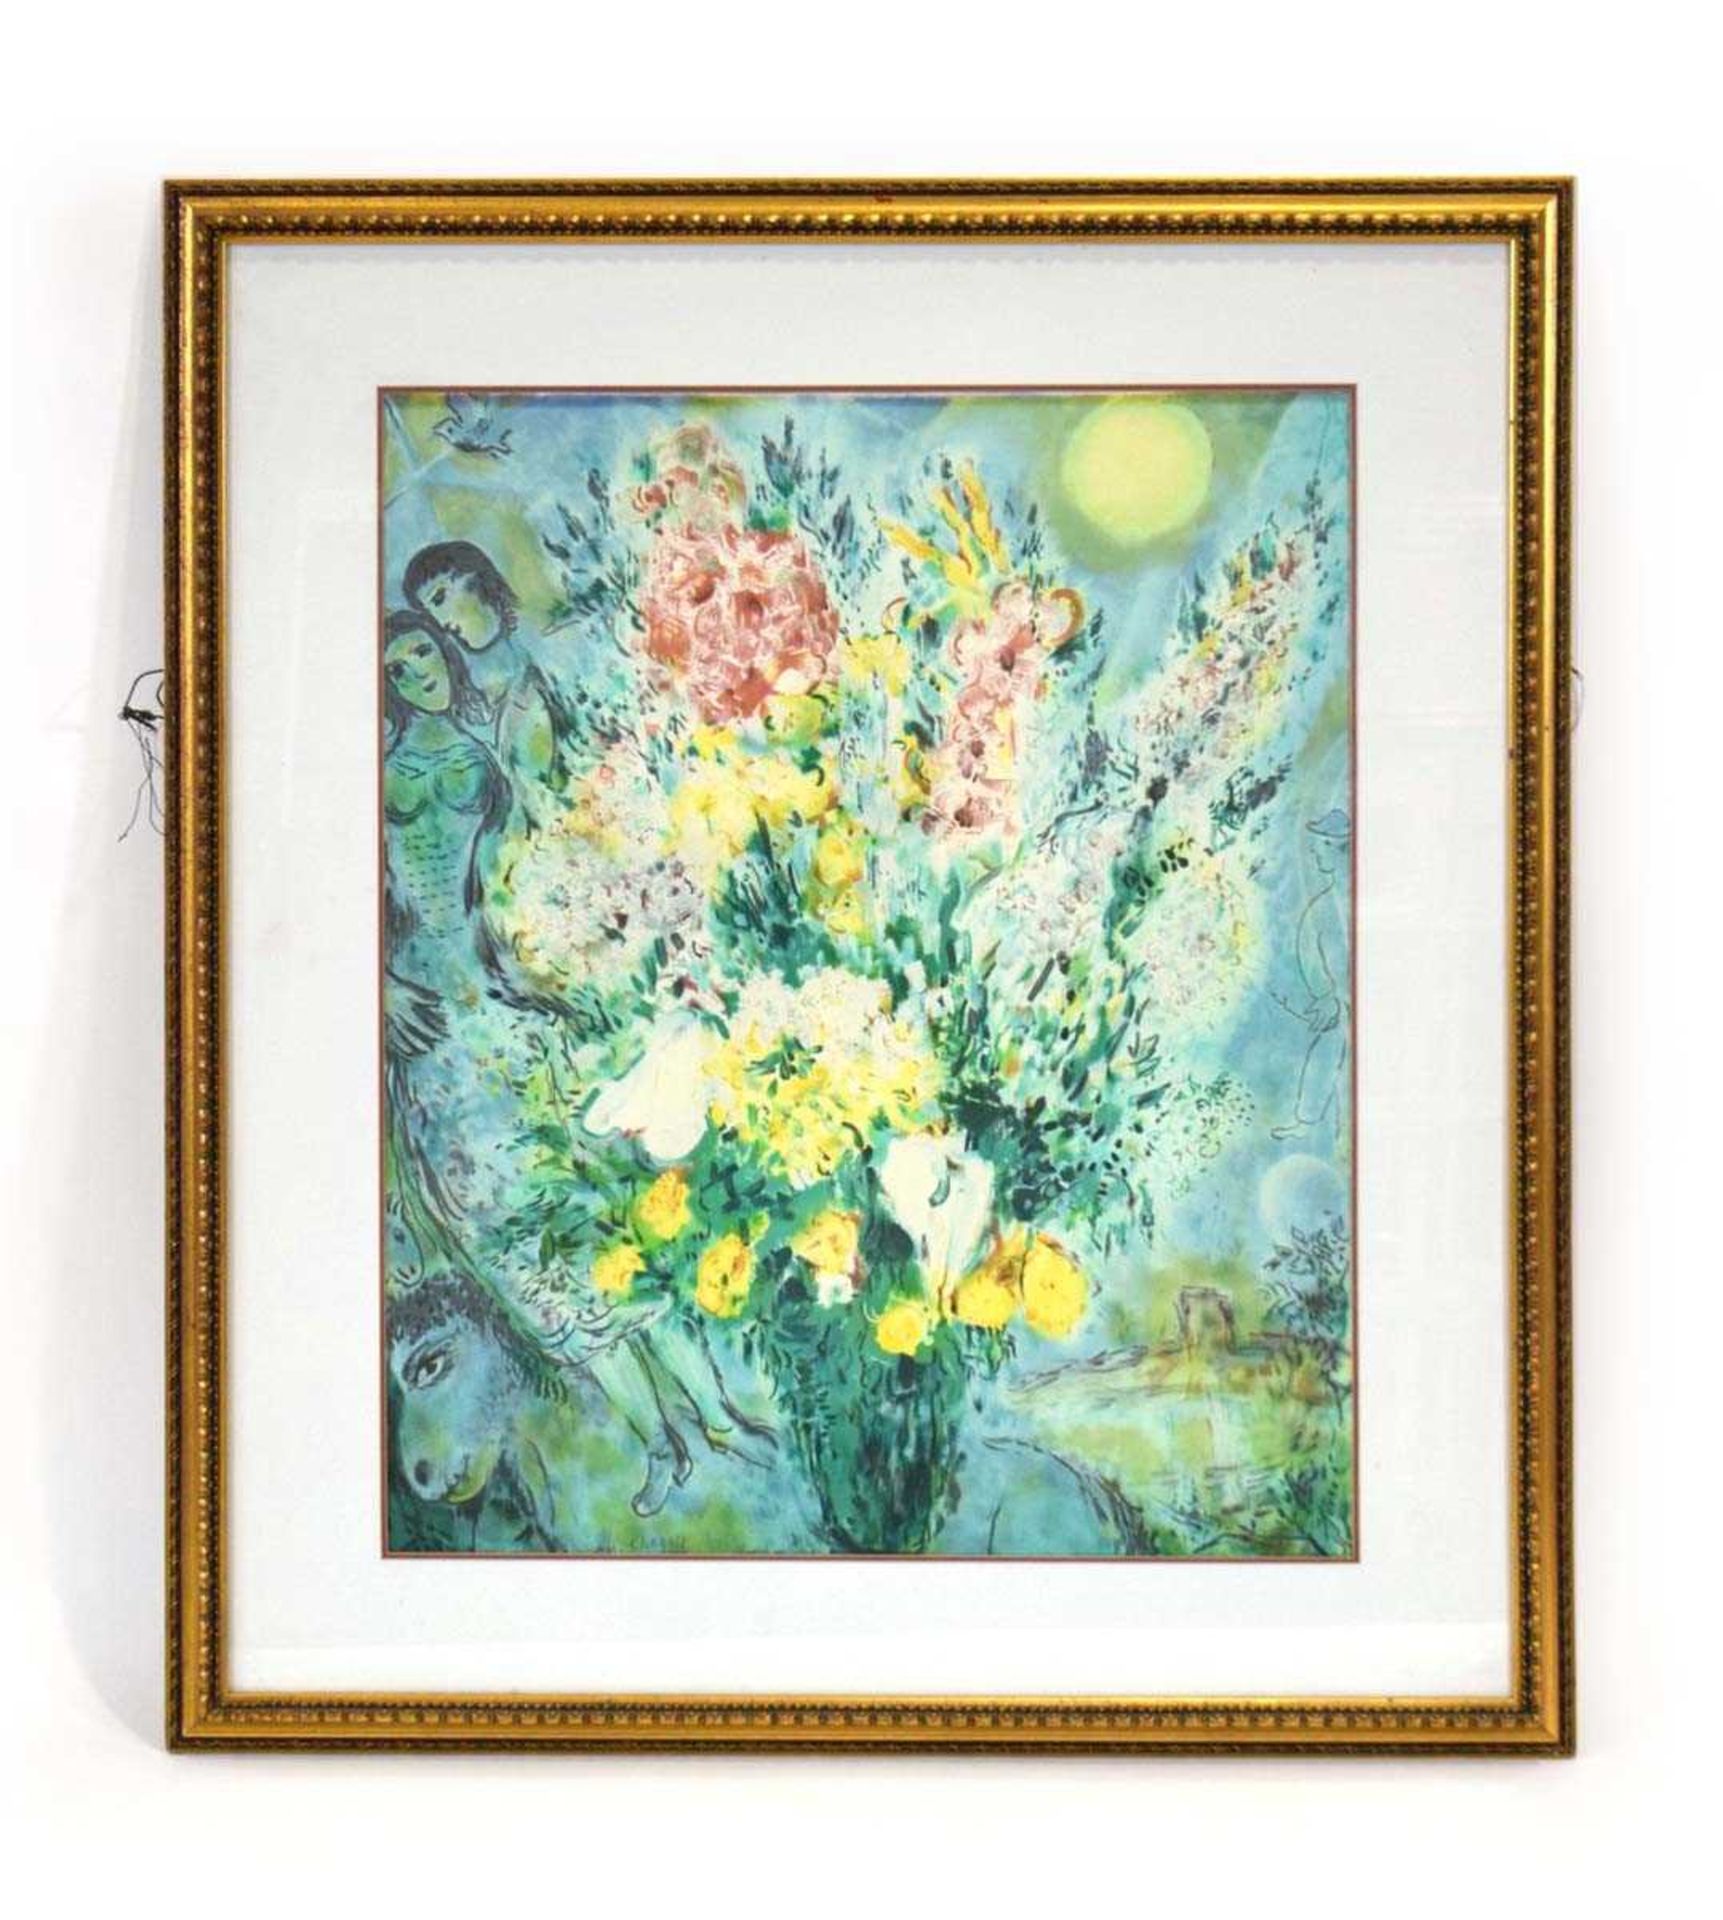 After Marc Chagall (French-Russian, 1887-1985), 'Bouquet', lithograph, image 69 x 56 cm